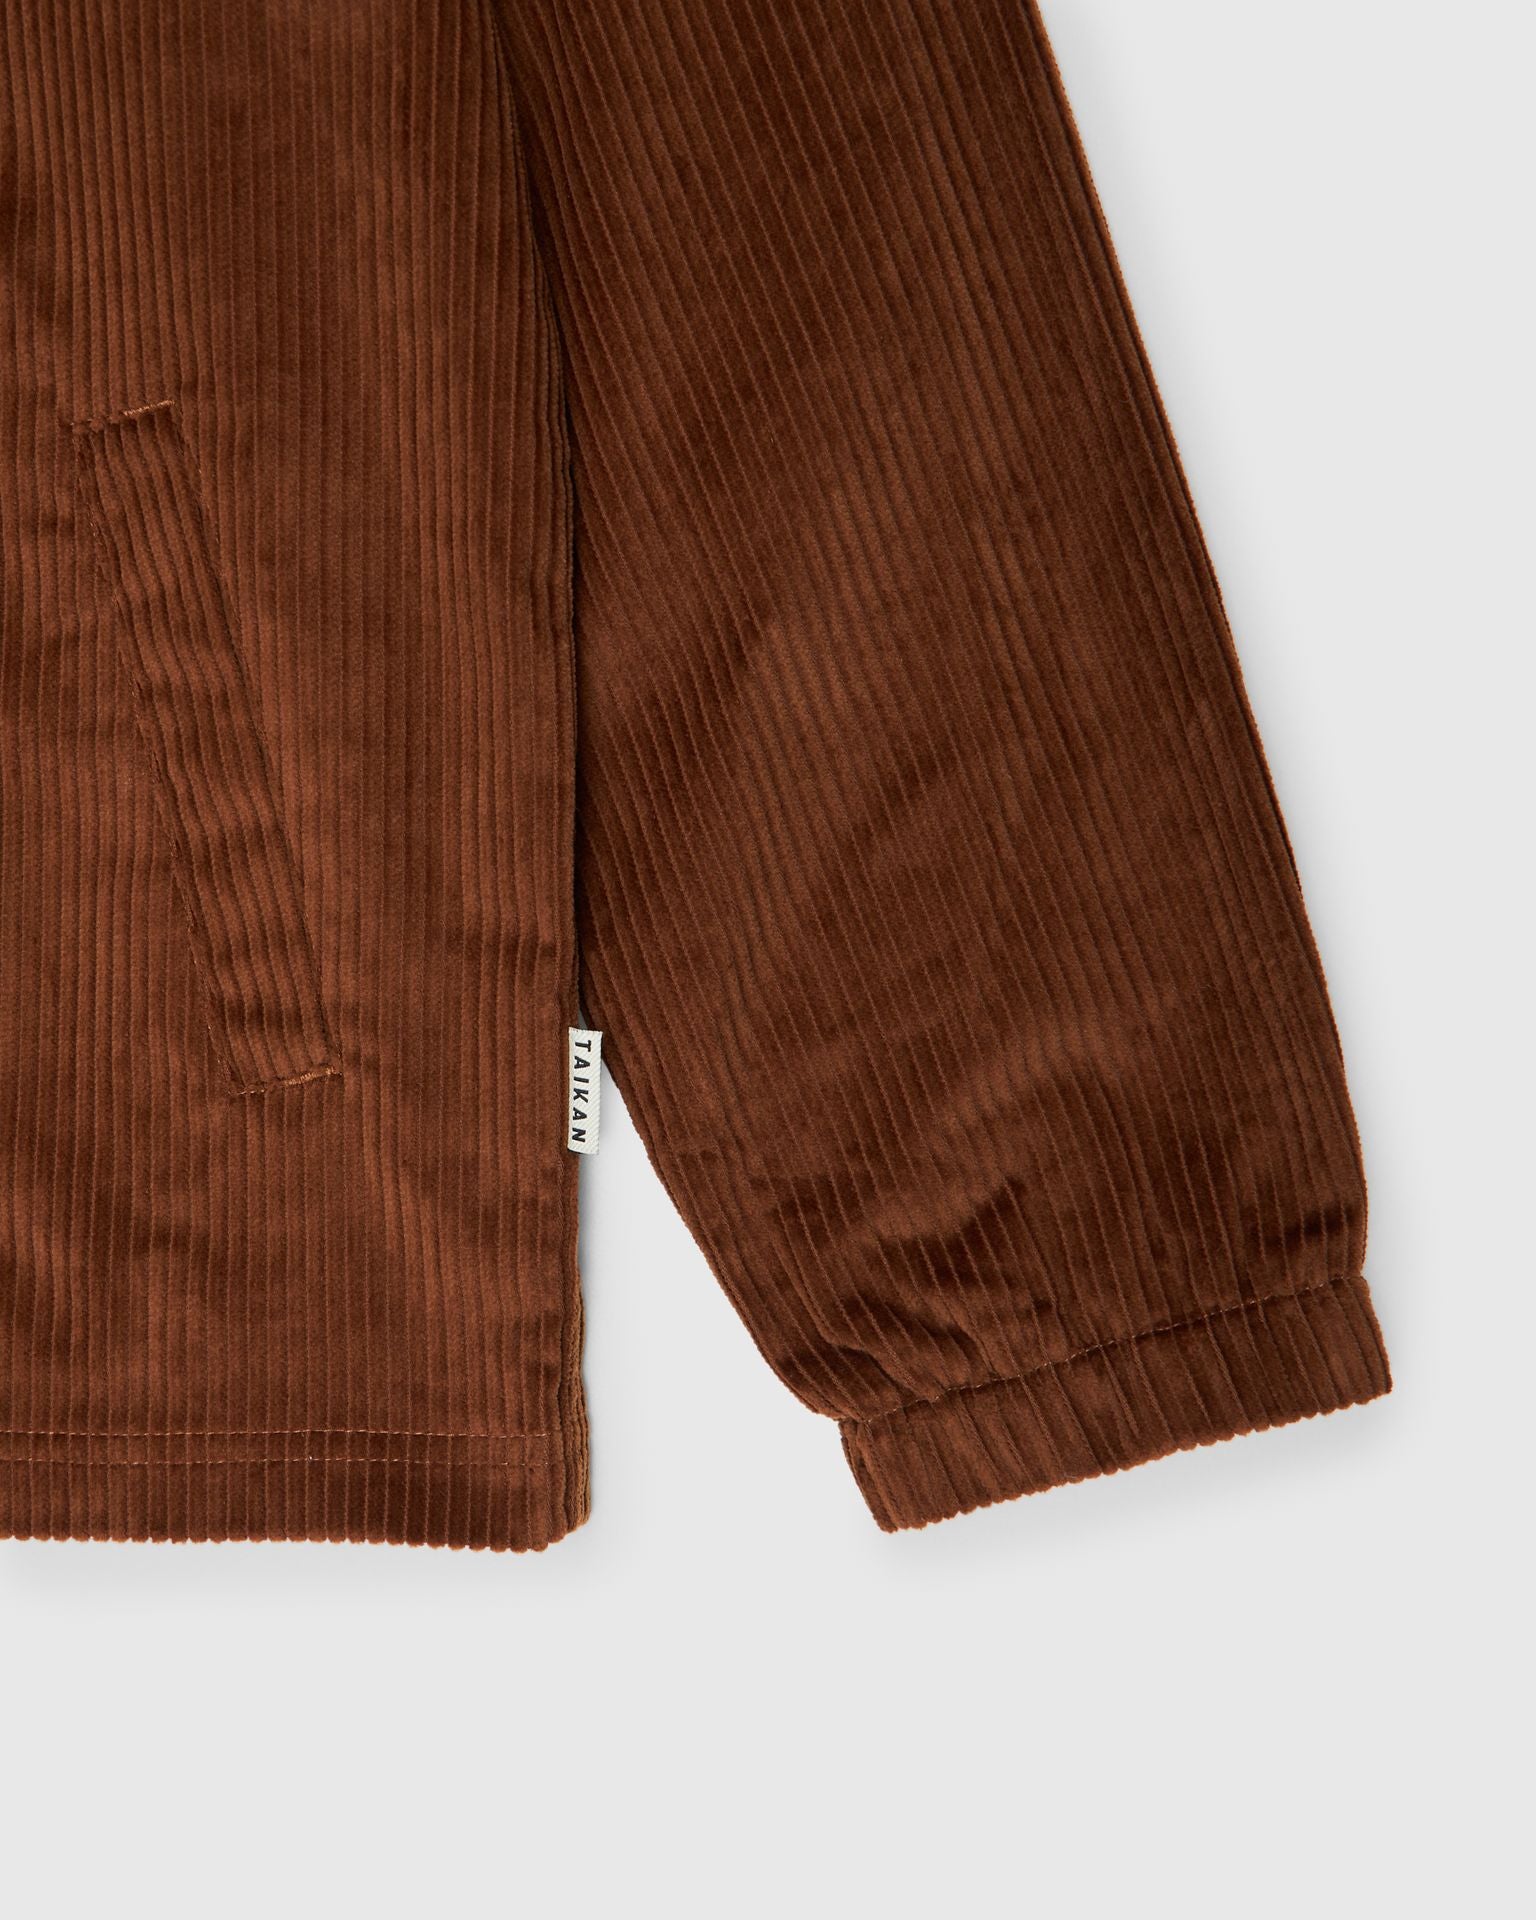 Corduroy Manager's Jacket in Dune